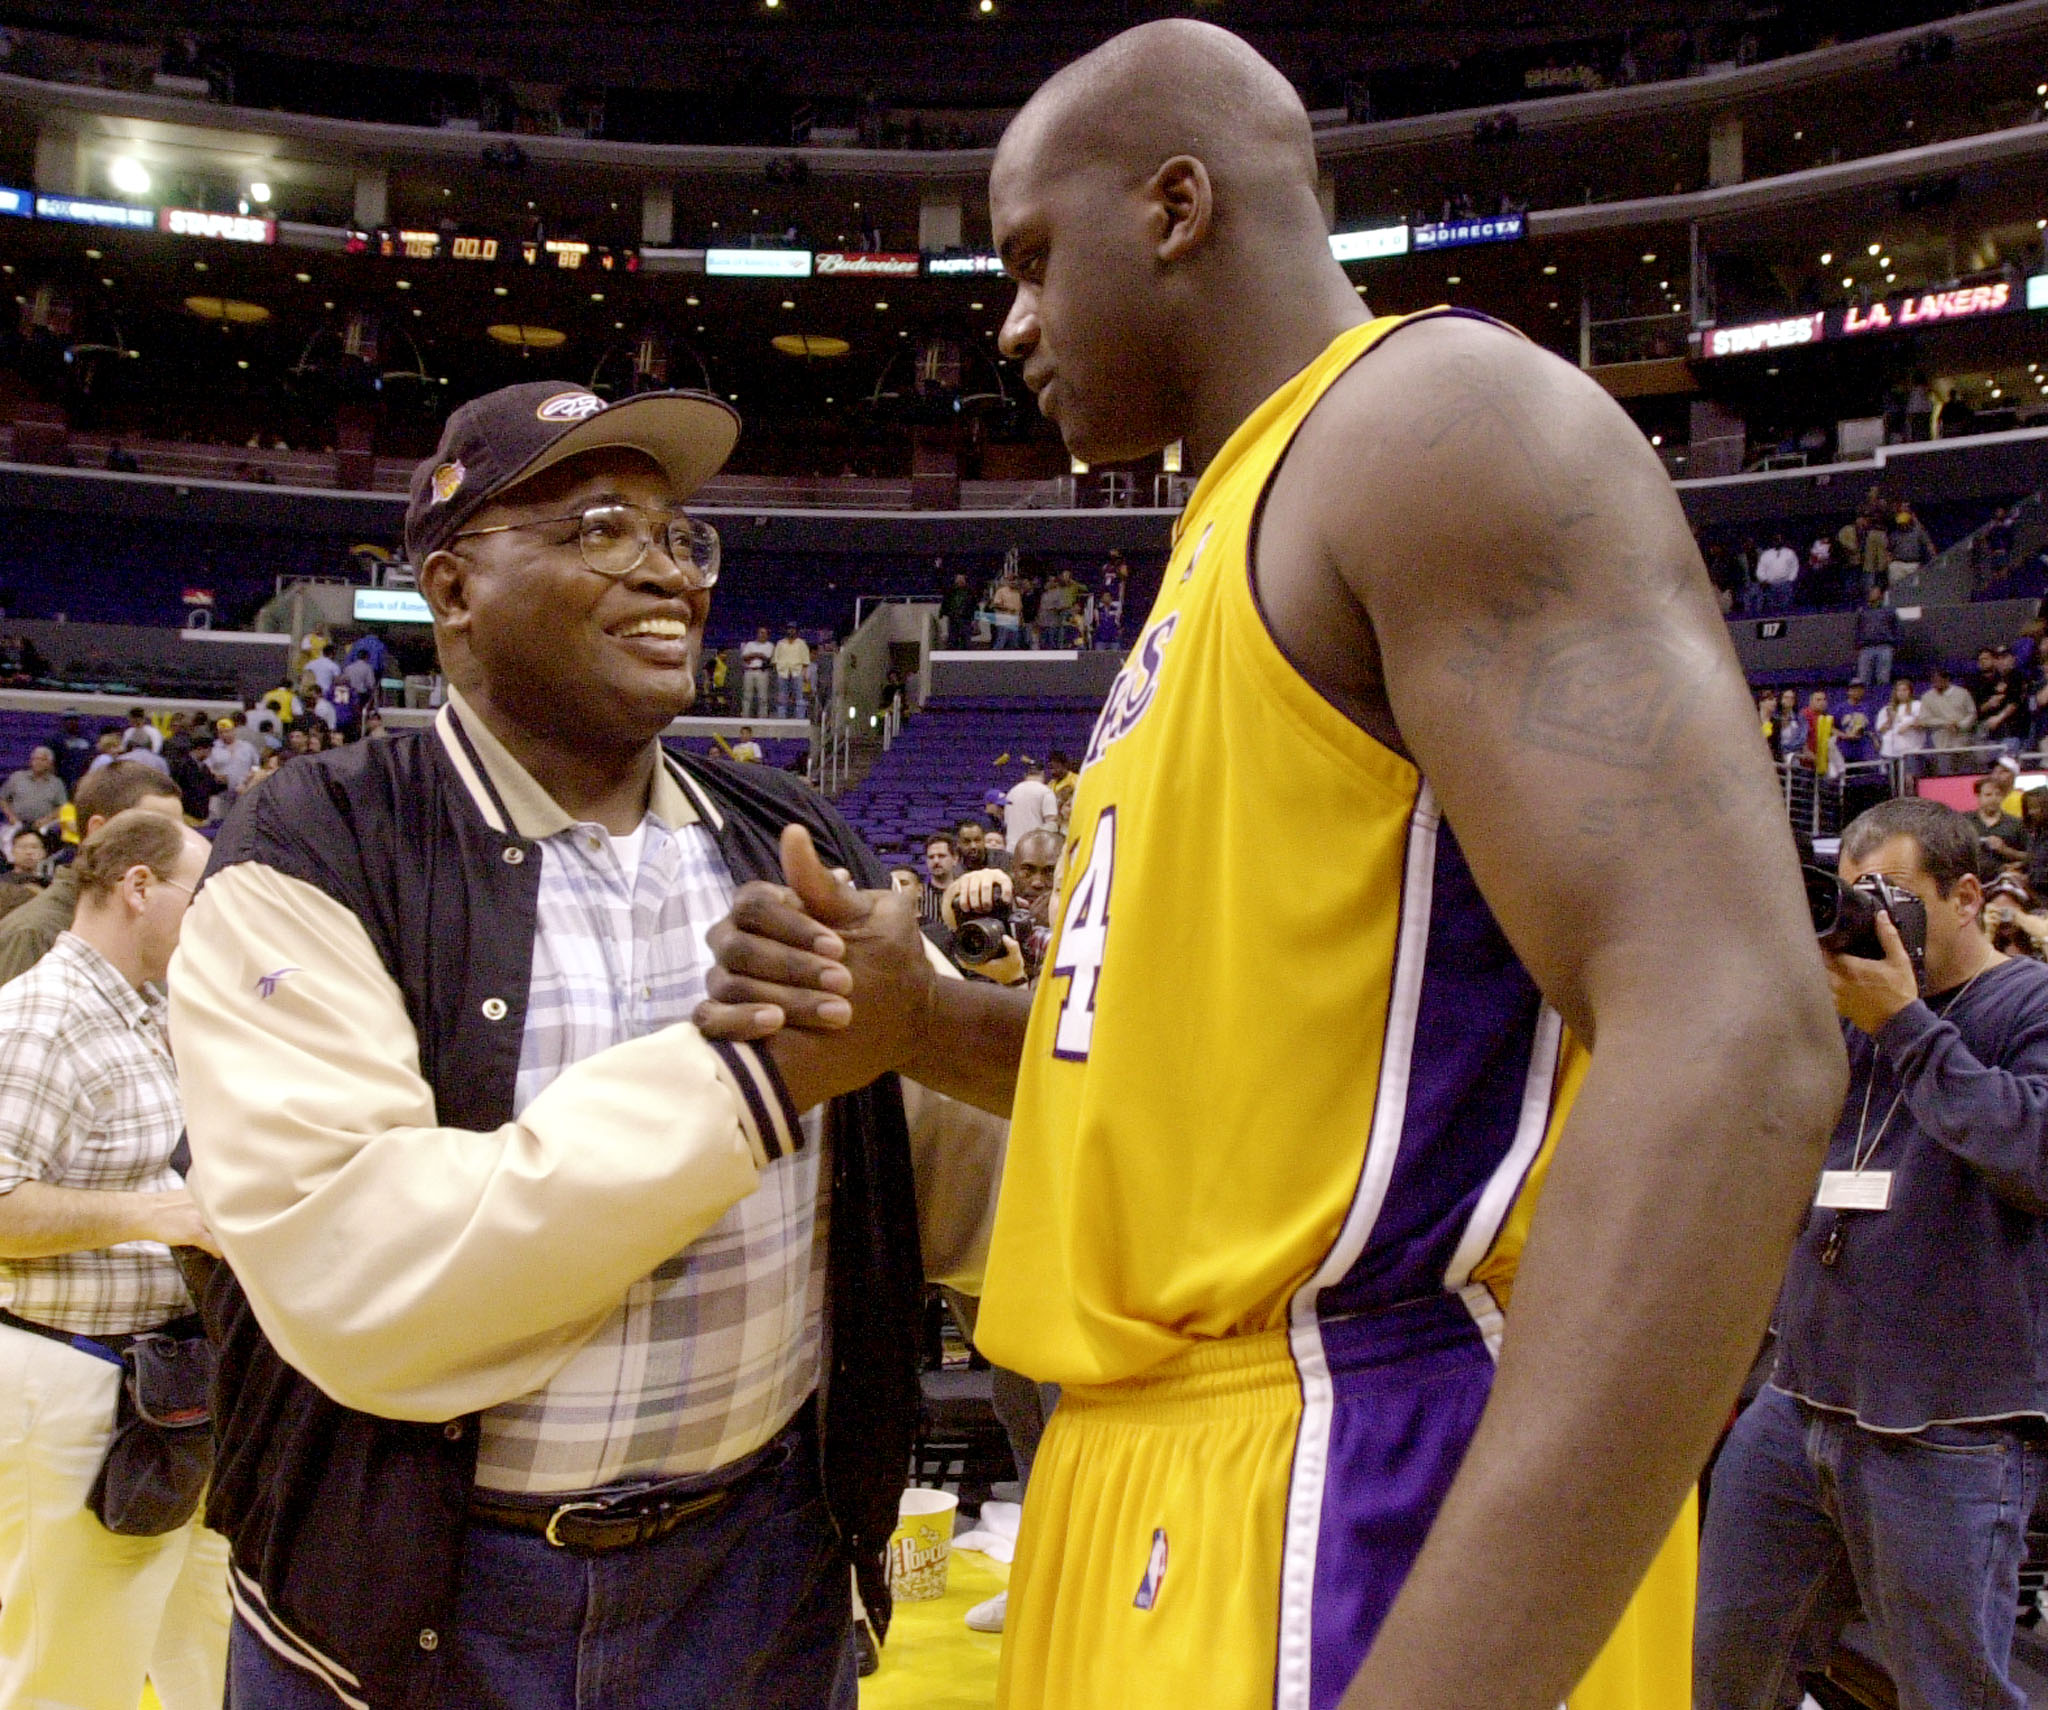 Philip Harrison congratulates Shaquille O'Neal after a game on April 26, 2001, in Los Angeles, California. | Source: Getty Images